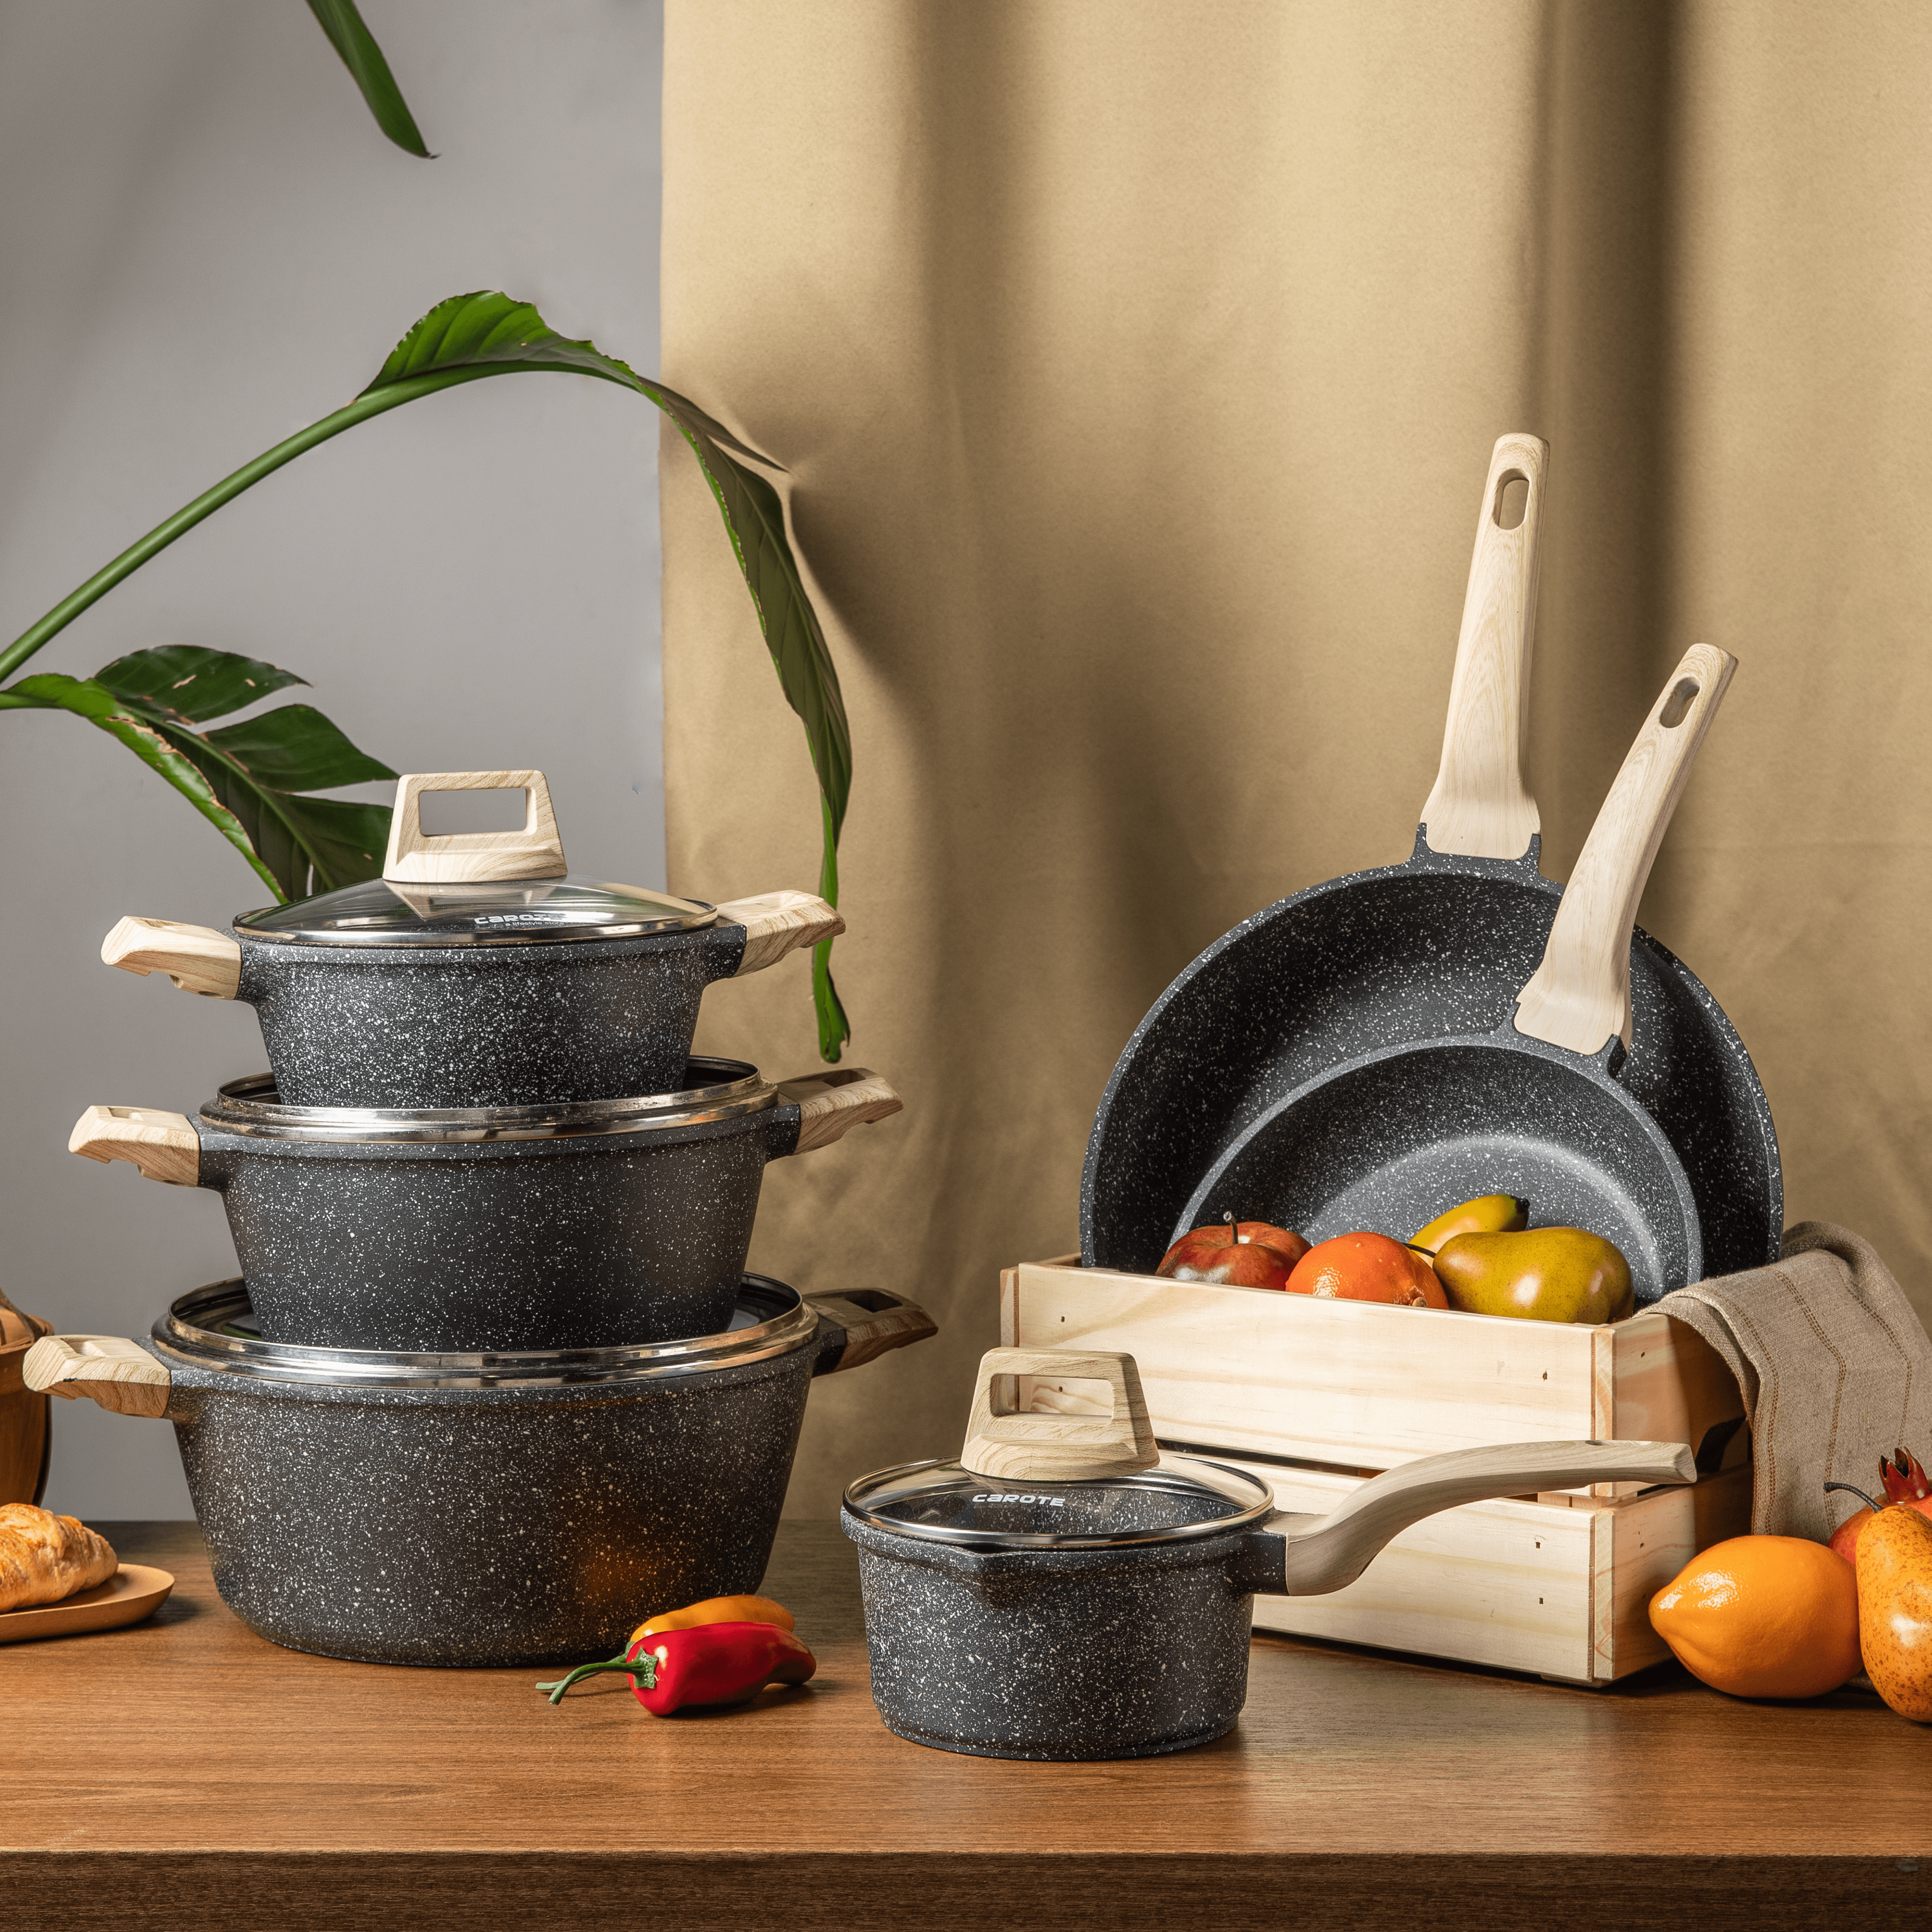 Reviewing the Carote Nonstick Granite Cookware Set.